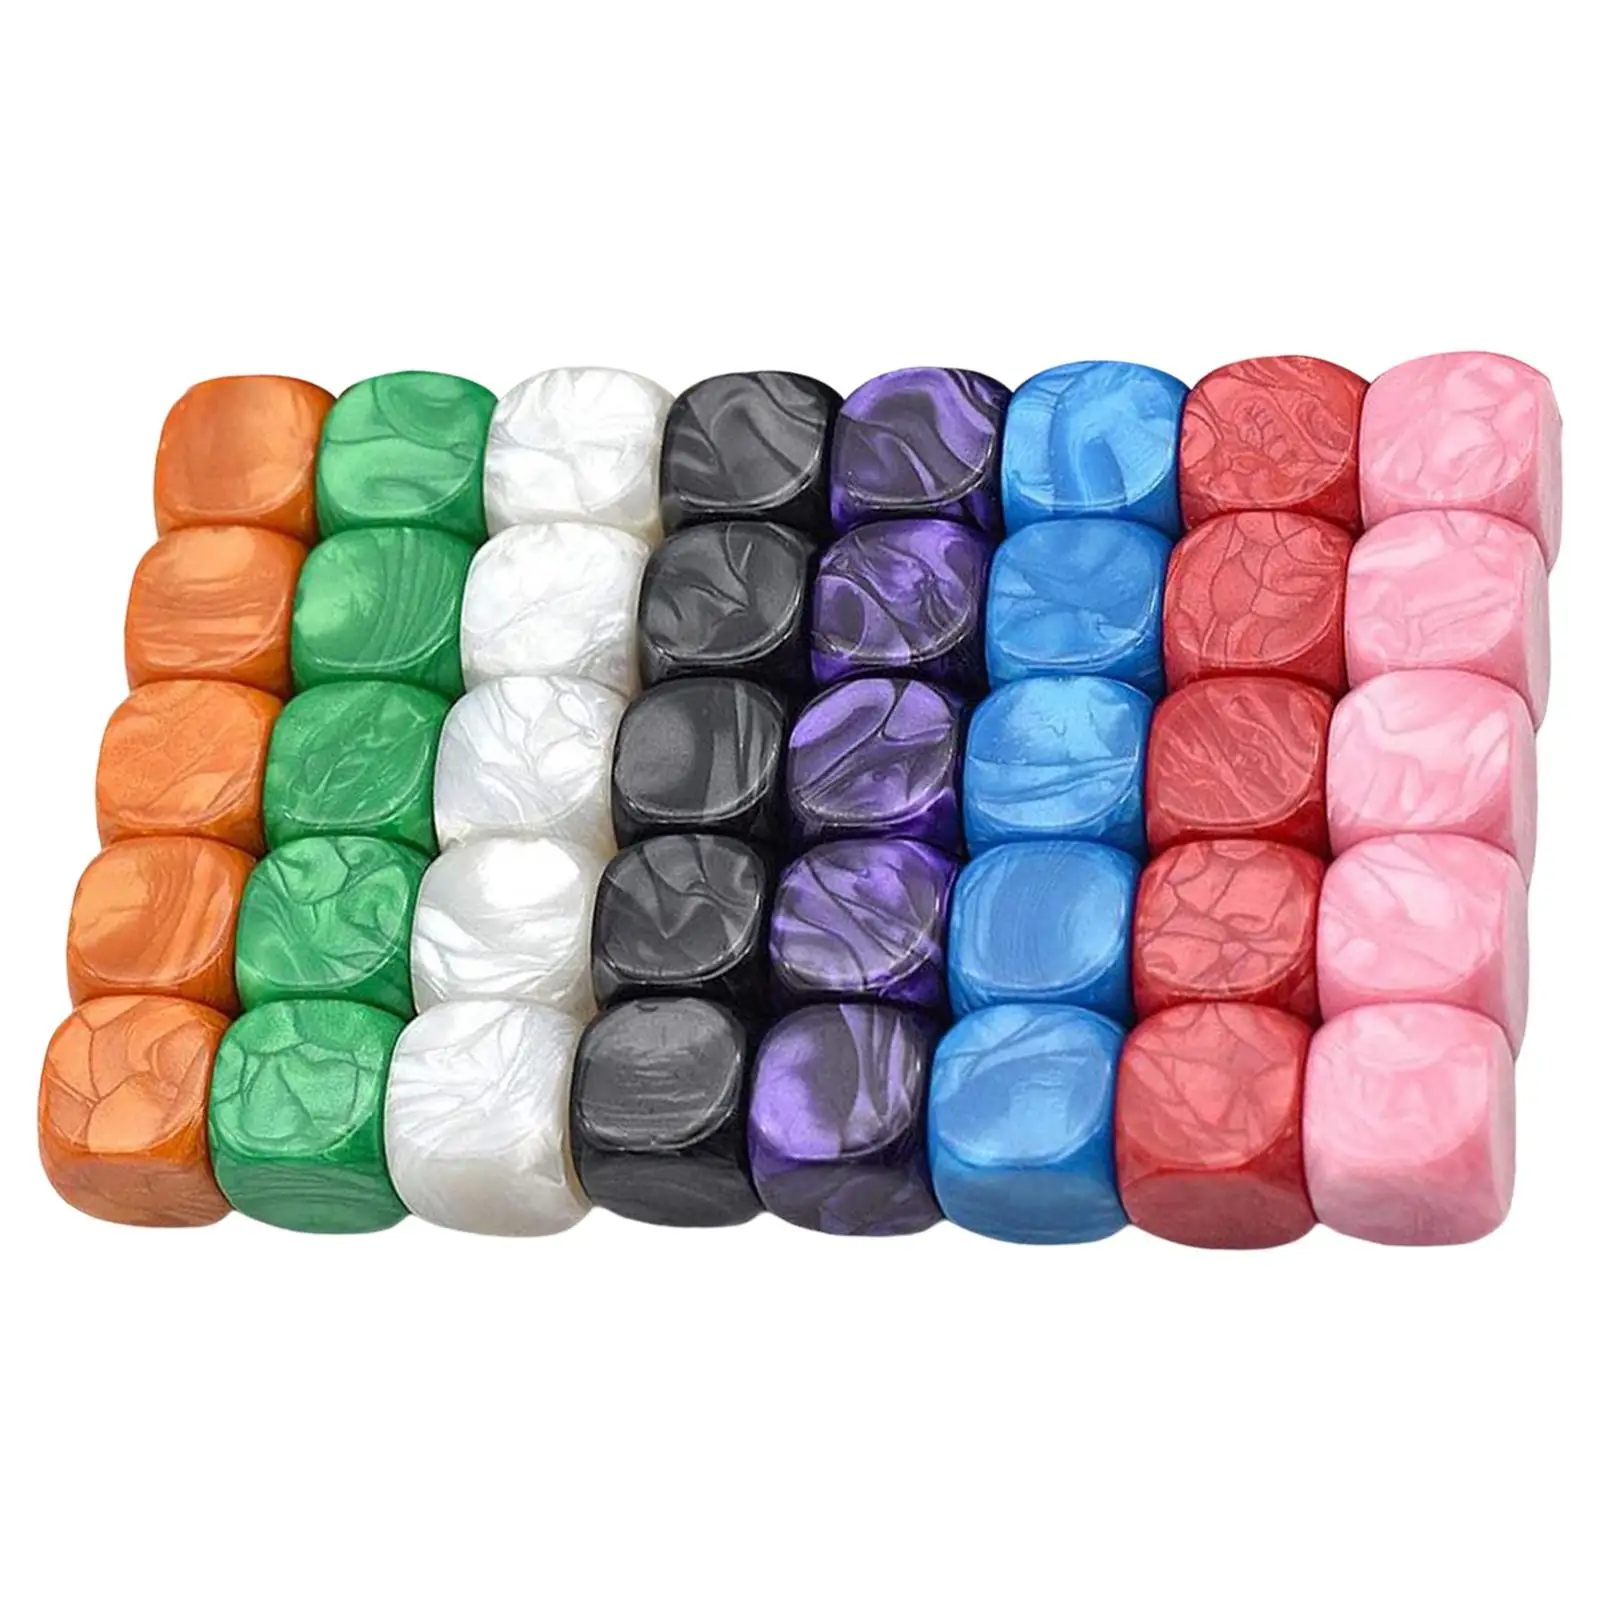 Acrylic 16mm Blank Dice for Party Favor, Classroom Board Game, Dice Making, Math